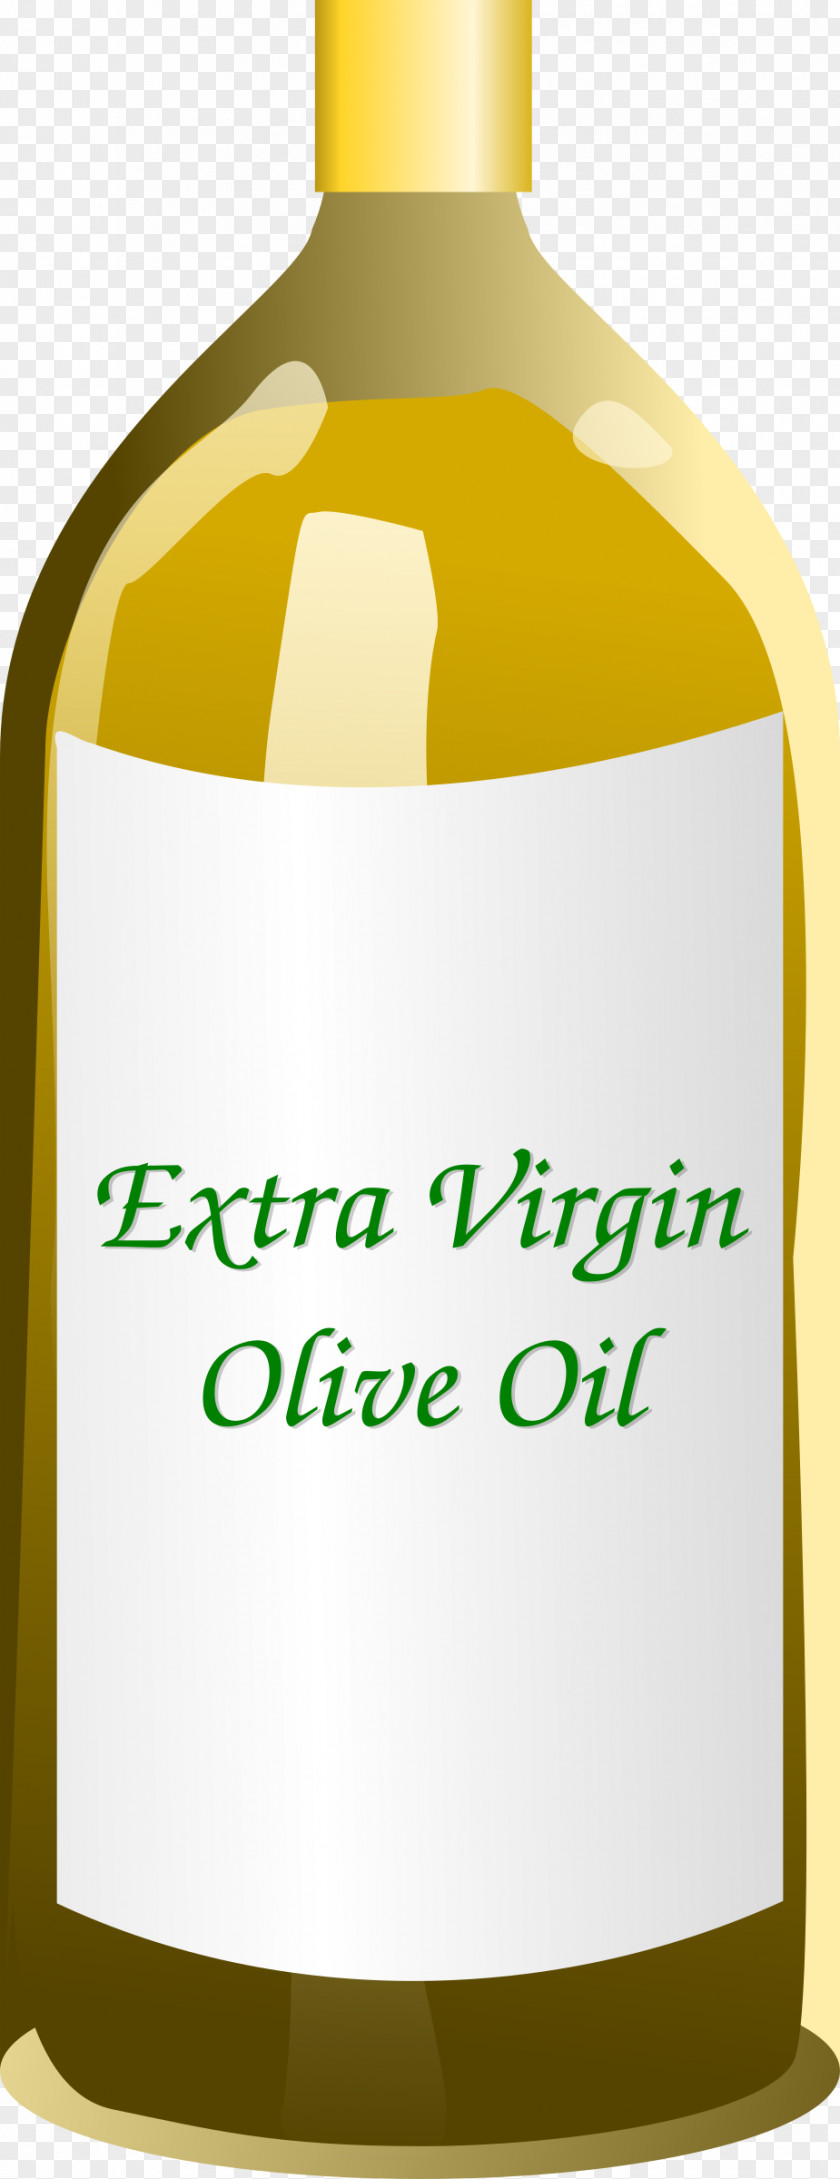 Cooking Oil Cliparts Italian Cuisine Olive Clip Art PNG